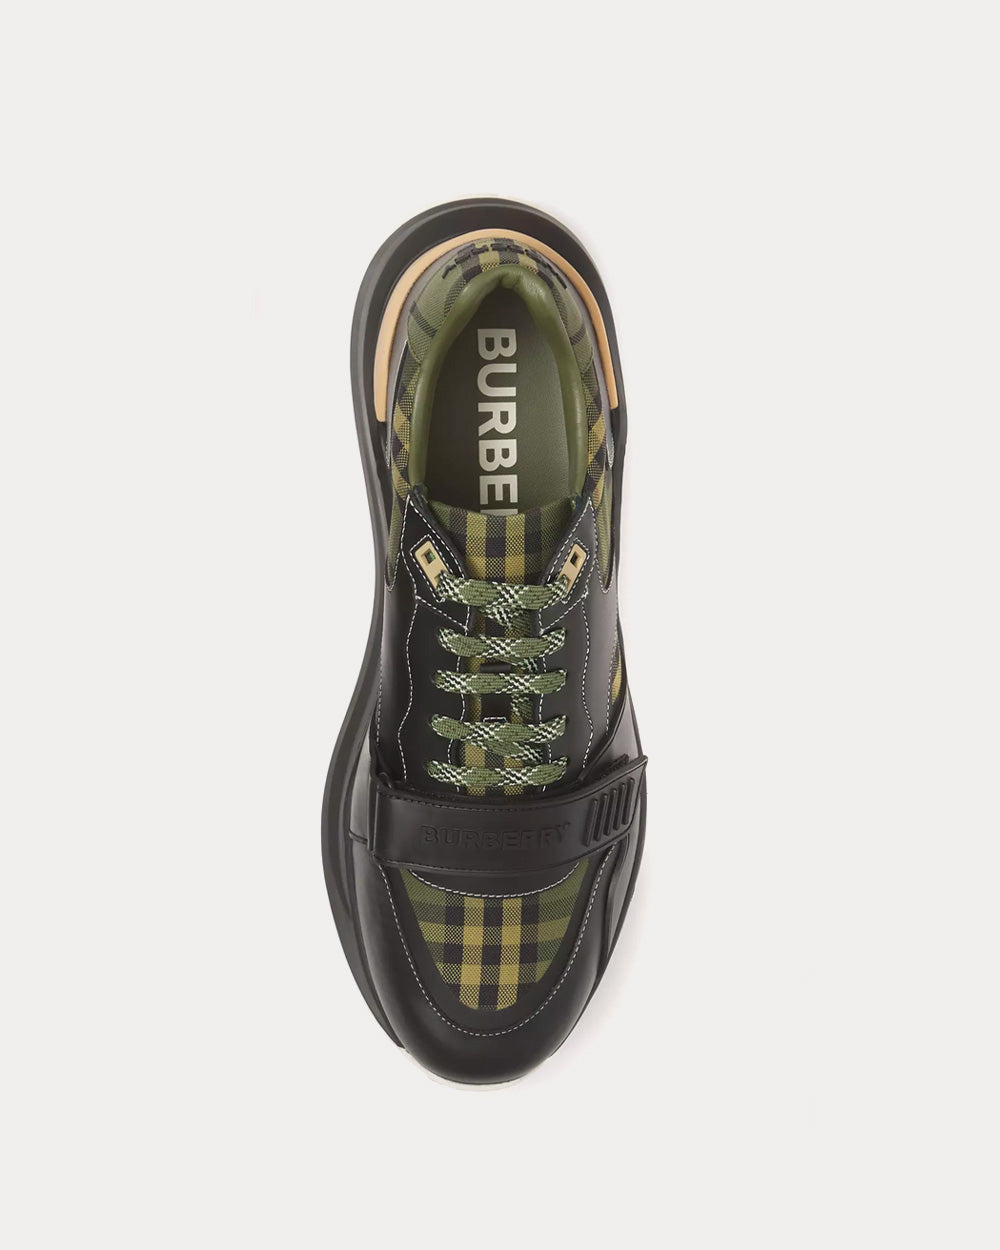 Burberry - Ramsey Check Cotton Canvas & Leather Military Green Low Top Sneakers